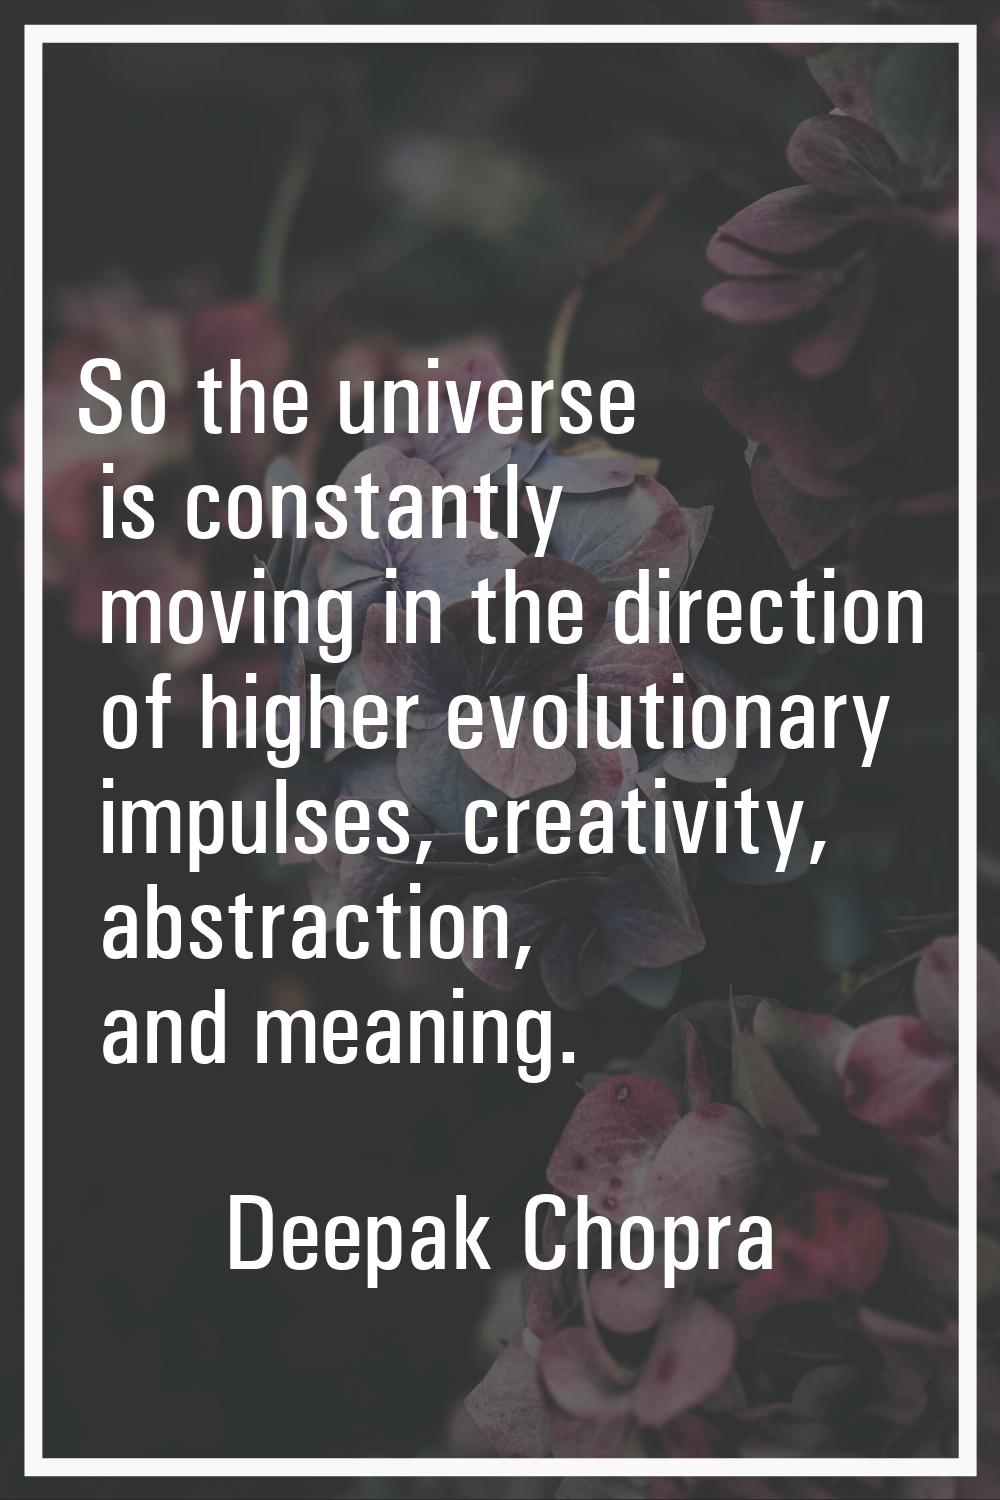 So the universe is constantly moving in the direction of higher evolutionary impulses, creativity, 